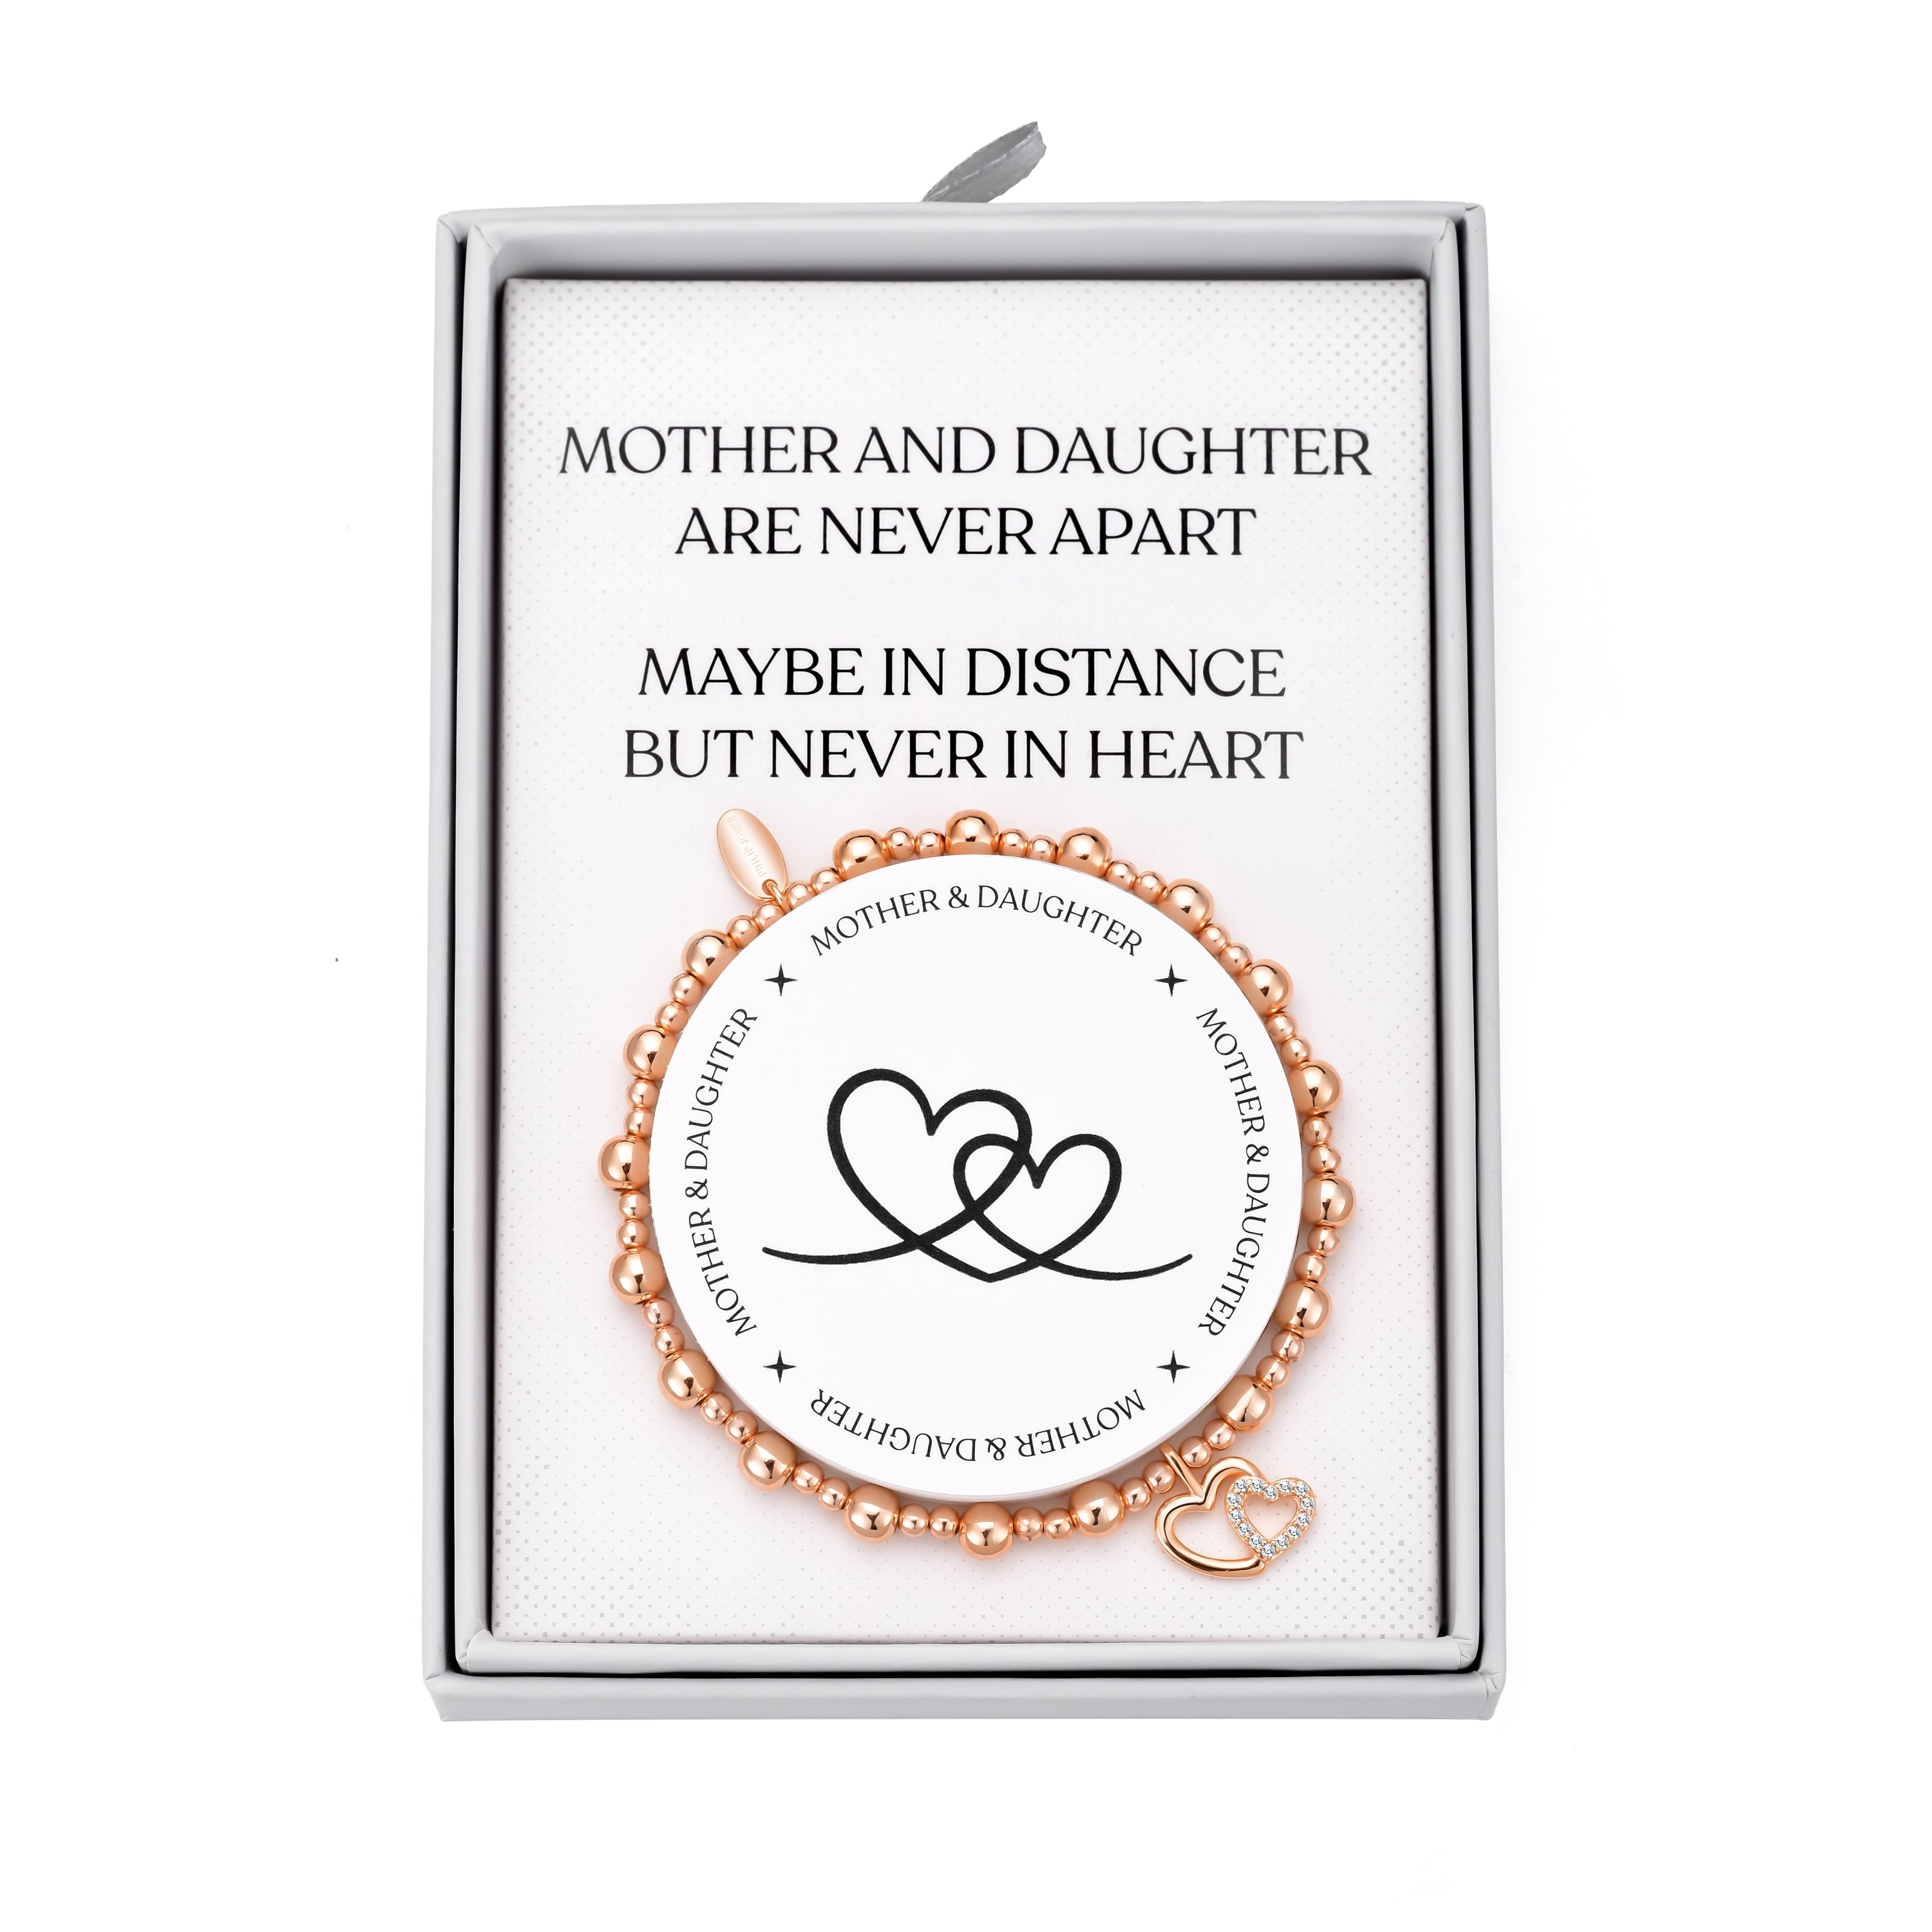 Rose Gold Plated Mother and Daughter Quote Stretch Bracelet with Gift Box by Philip Jones Jewellery